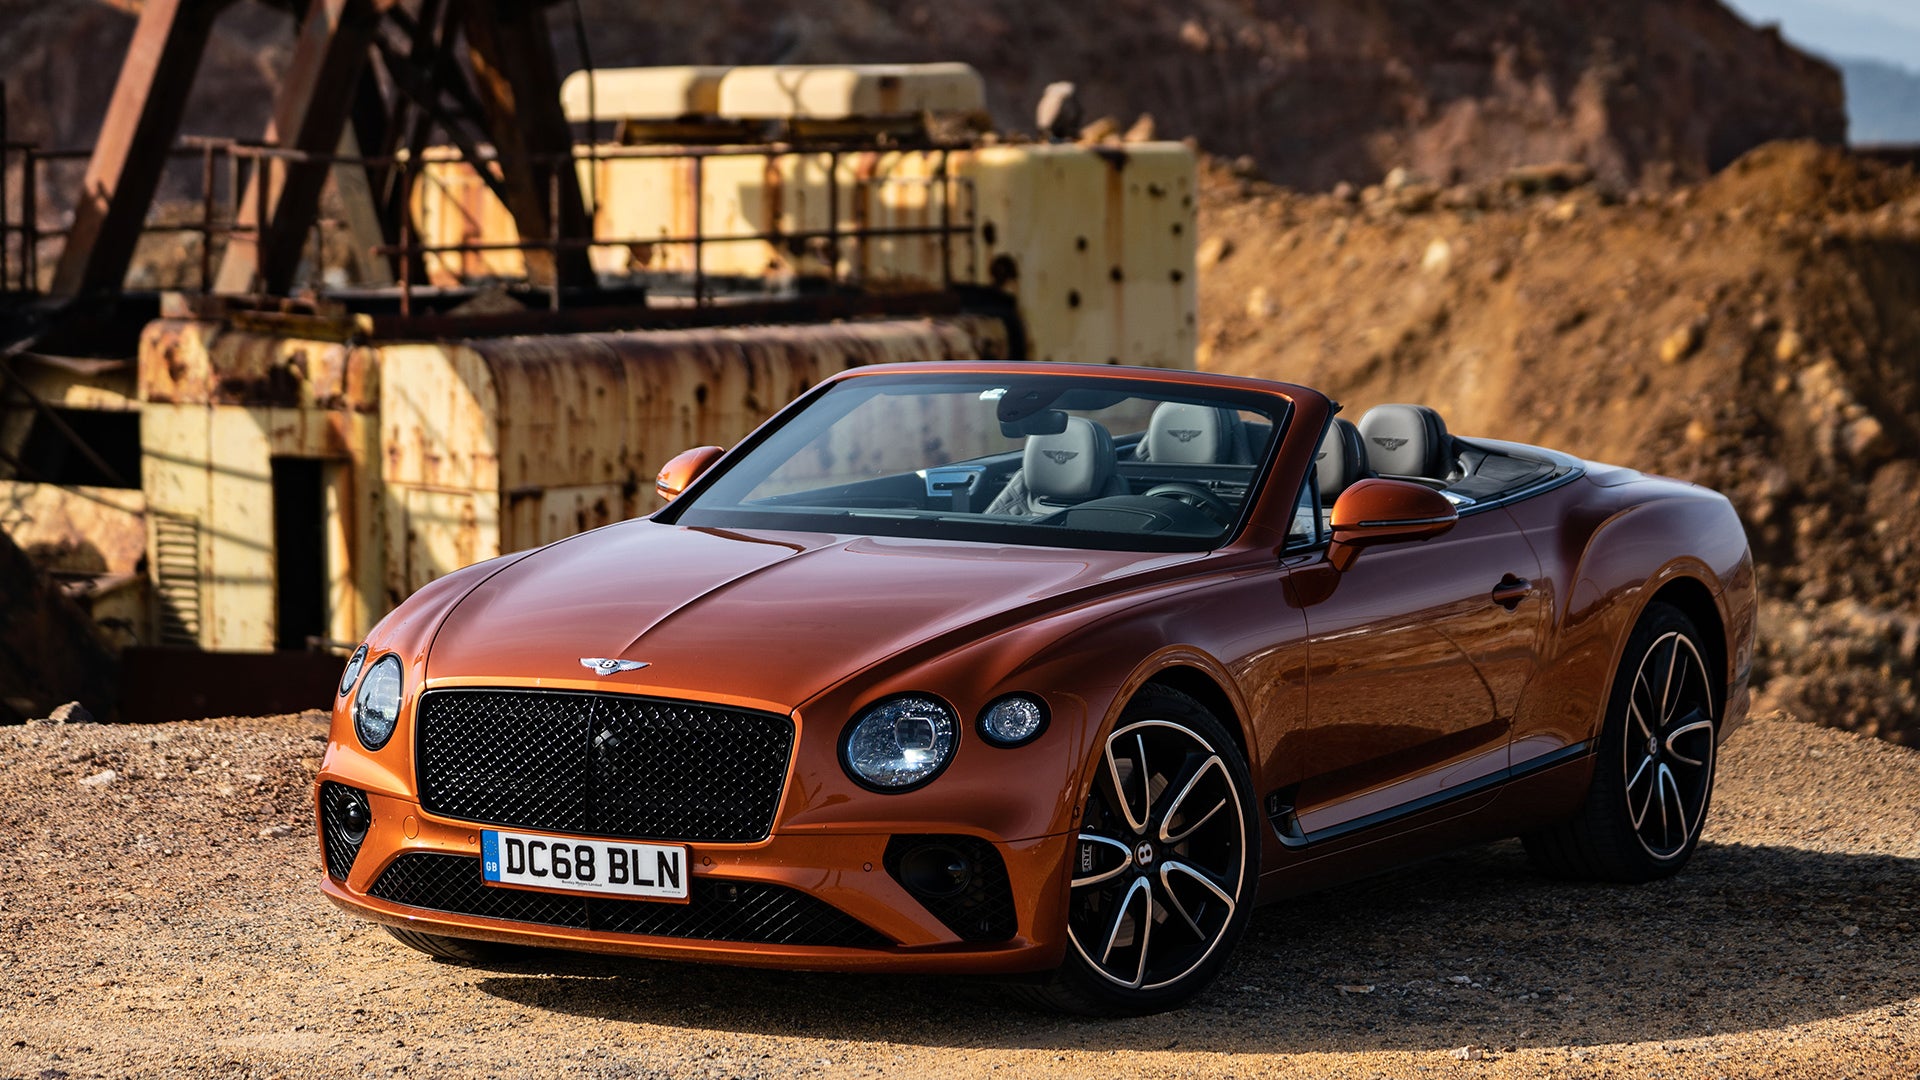 Elegance In Motion: The 2019 Bentley Continental GT Convertible